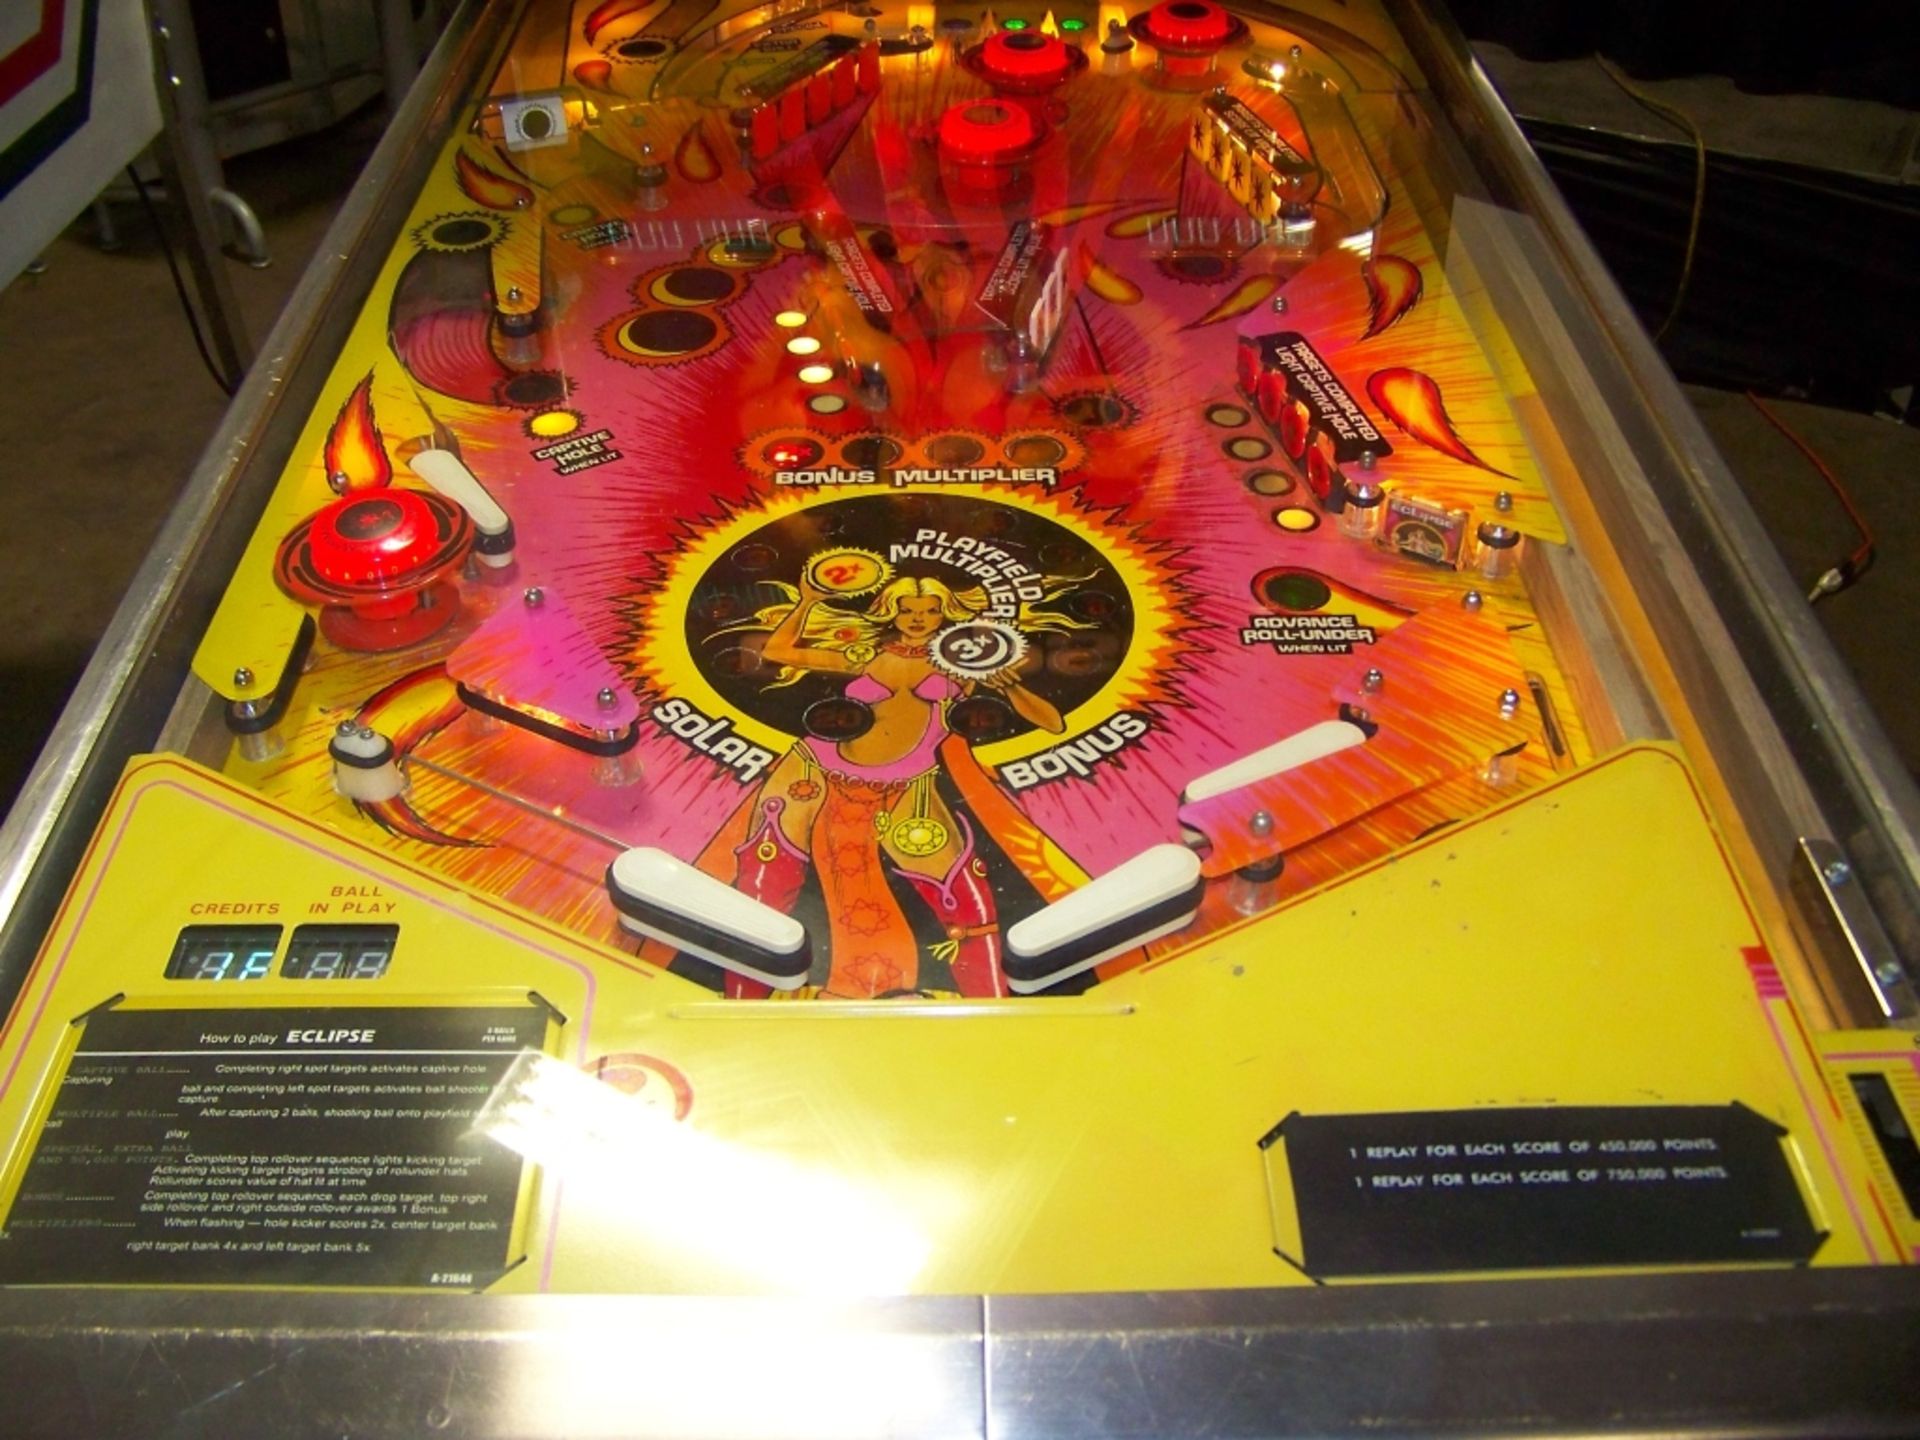 ECLIPSE PINBALL MACHINE RARE GOTTLIEB TITLE 1982 Item is in used condition. Evidence of wear and - Image 5 of 11